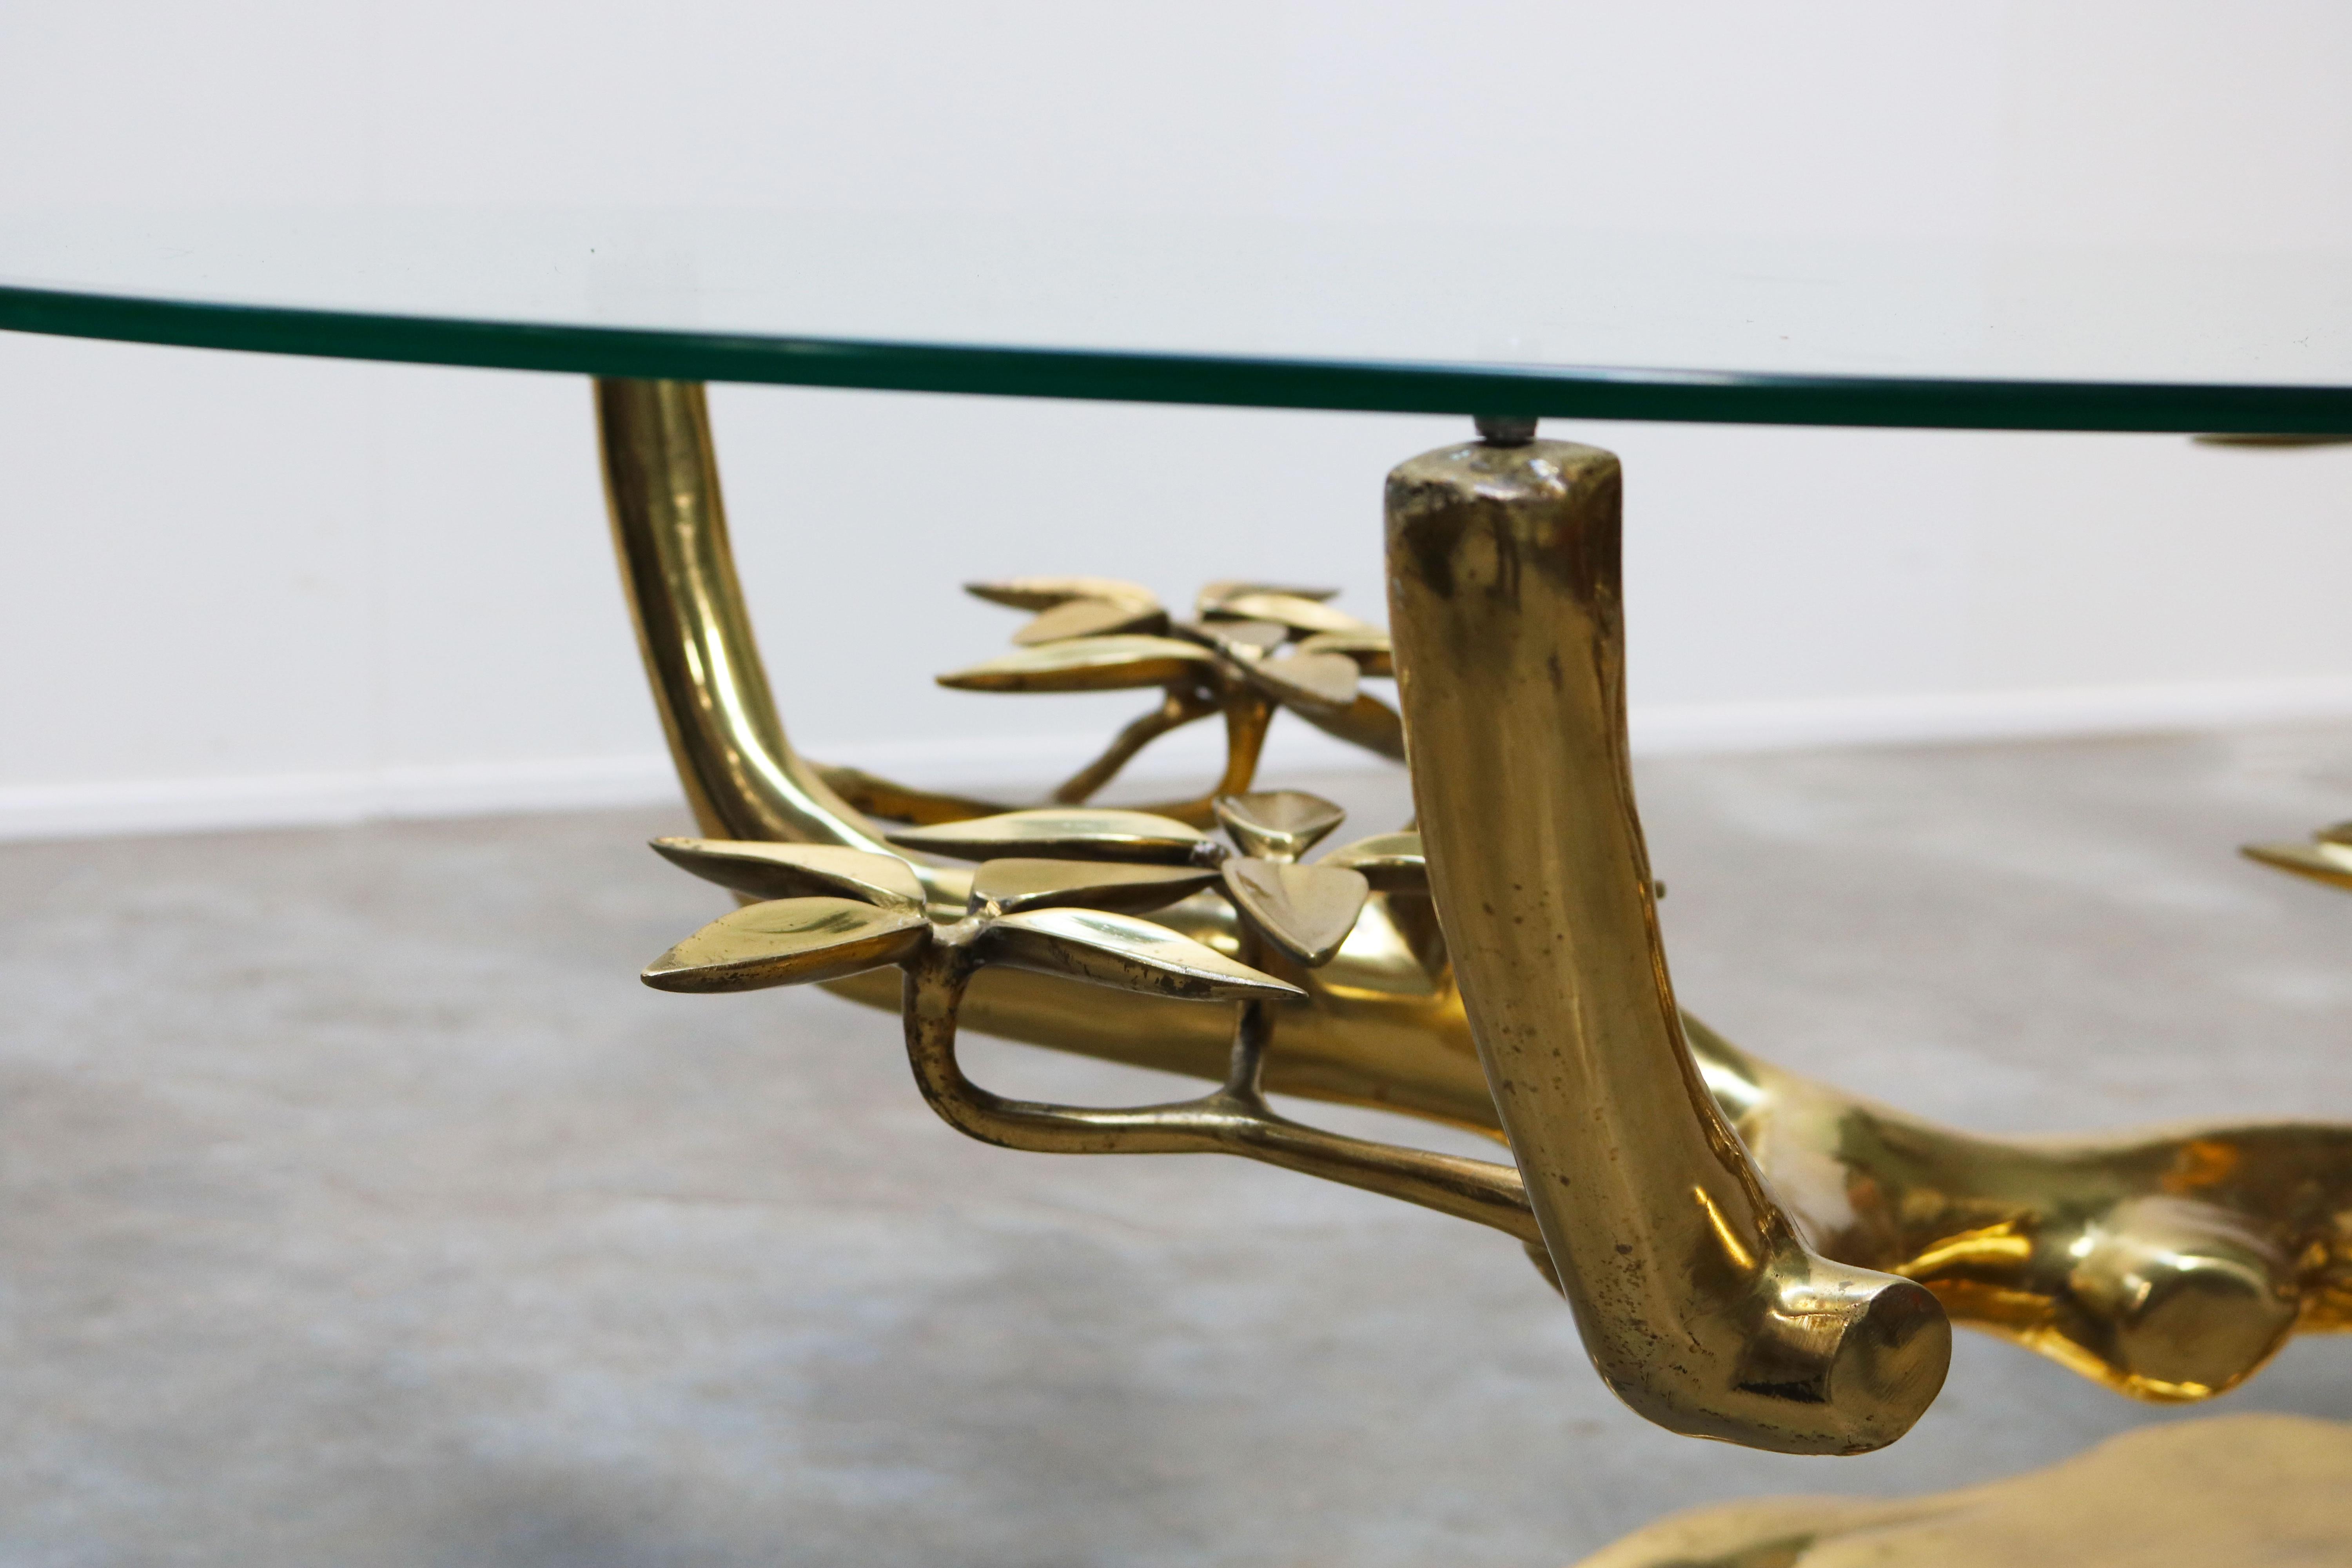 Late 20th Century Rare ''Bonsai'' Coffee Table in Brass by Willy Daro 1970s Belgium, Glass, Gold